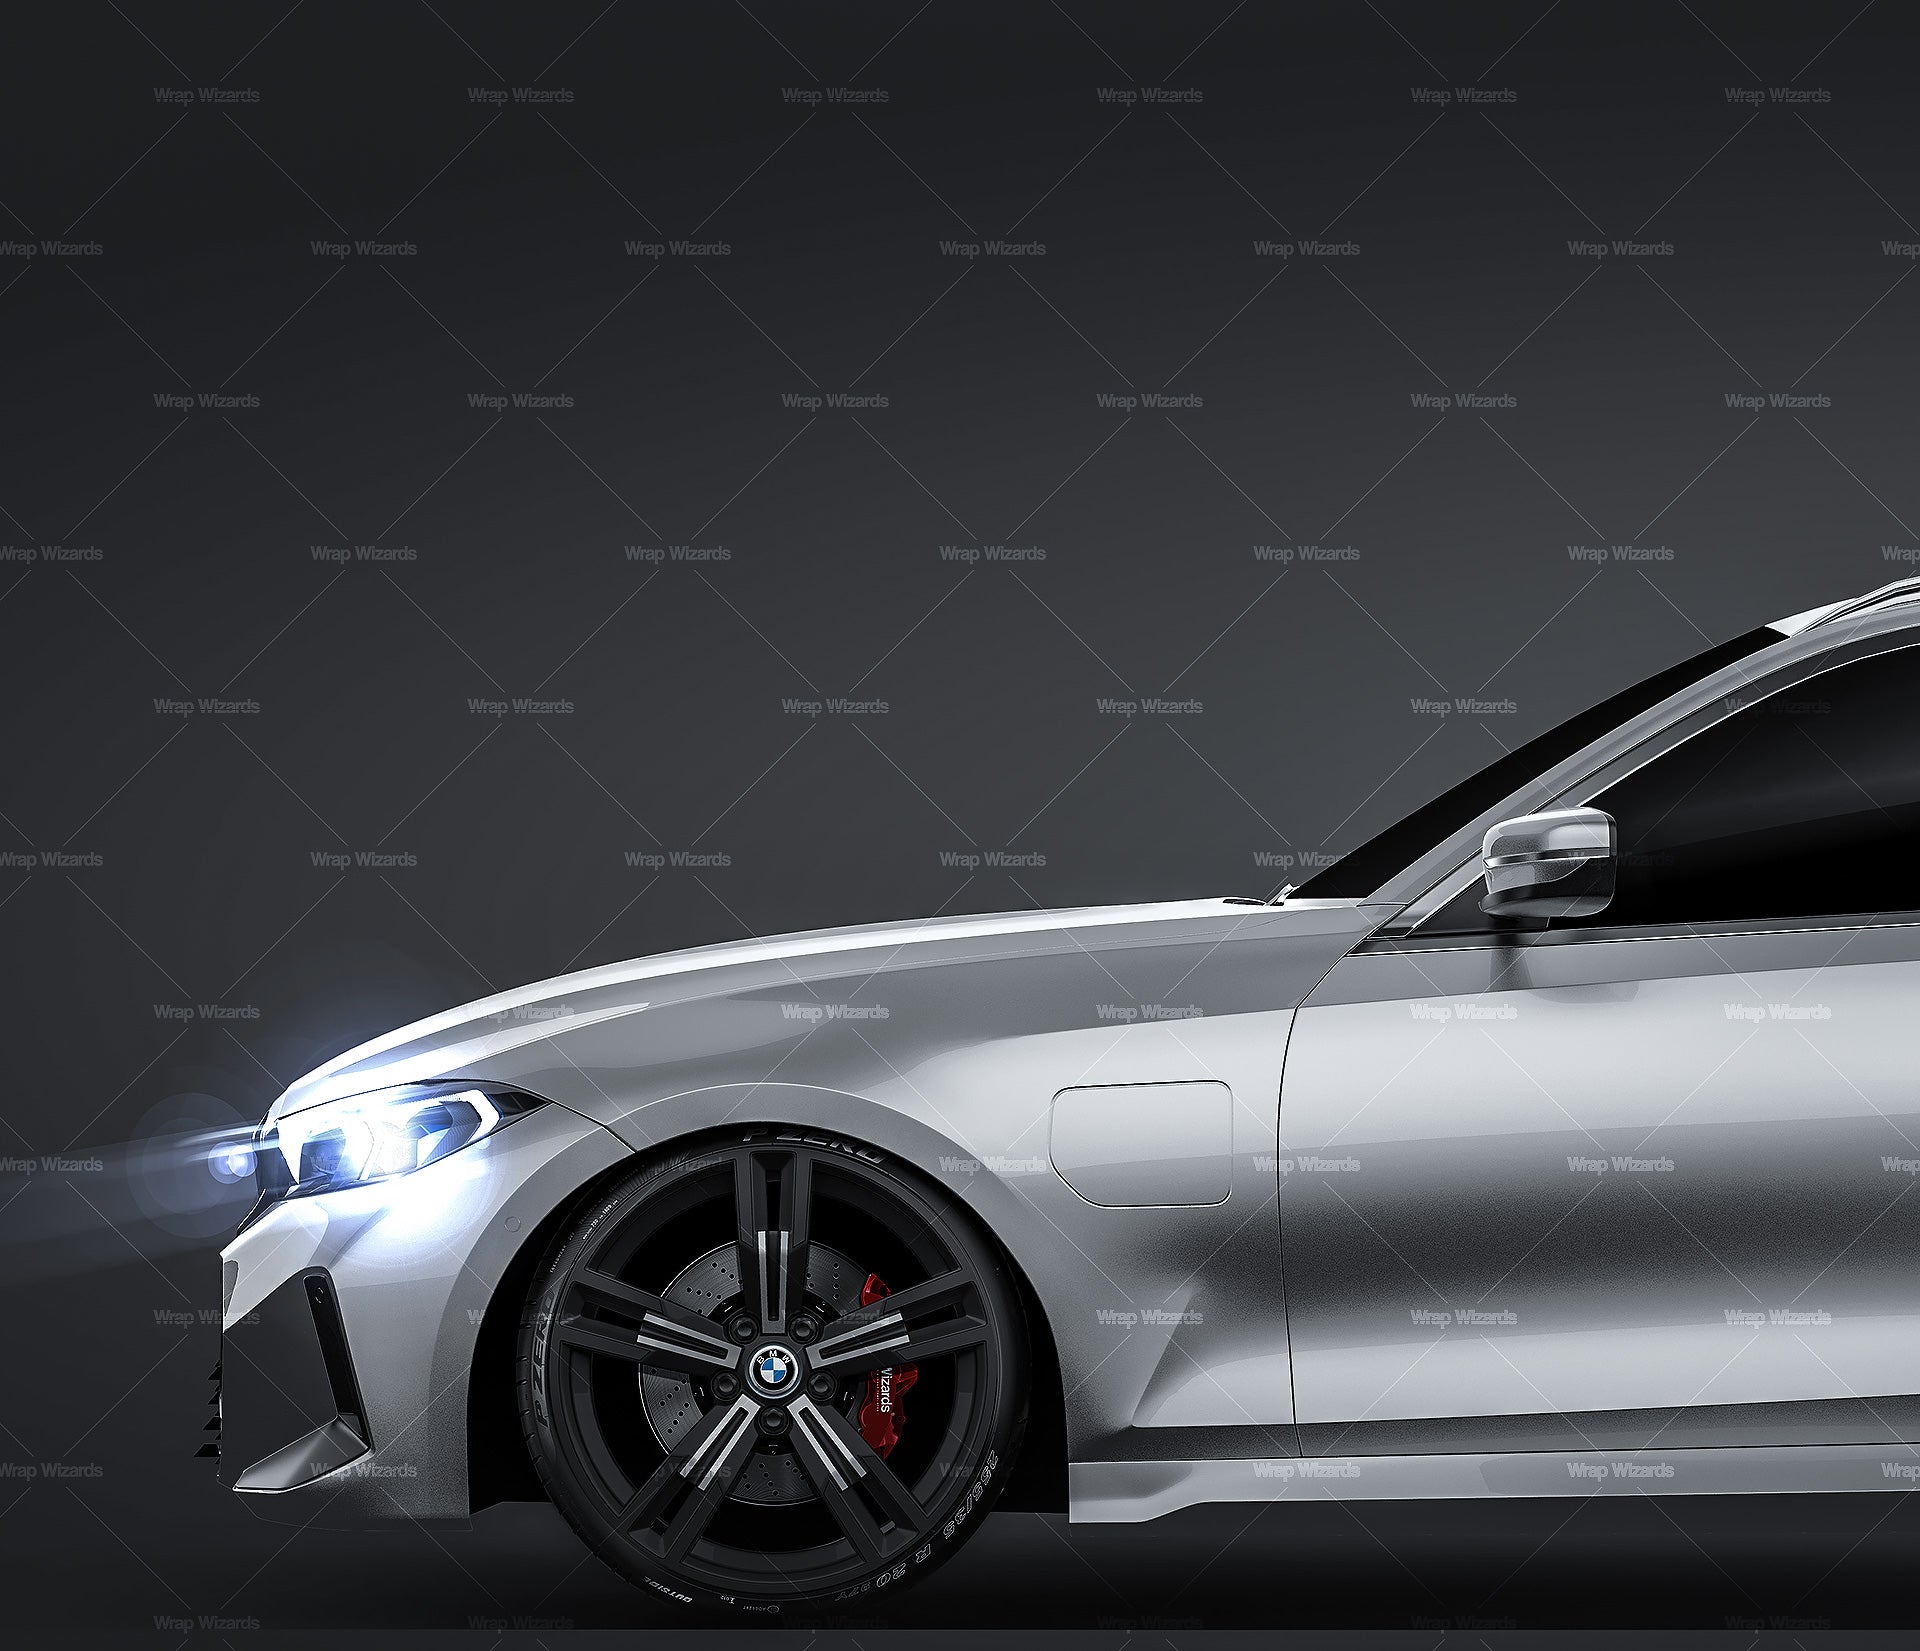 BMW M3 Touring G21 2023 glossy finish - all sides Car Mockup Template.psd